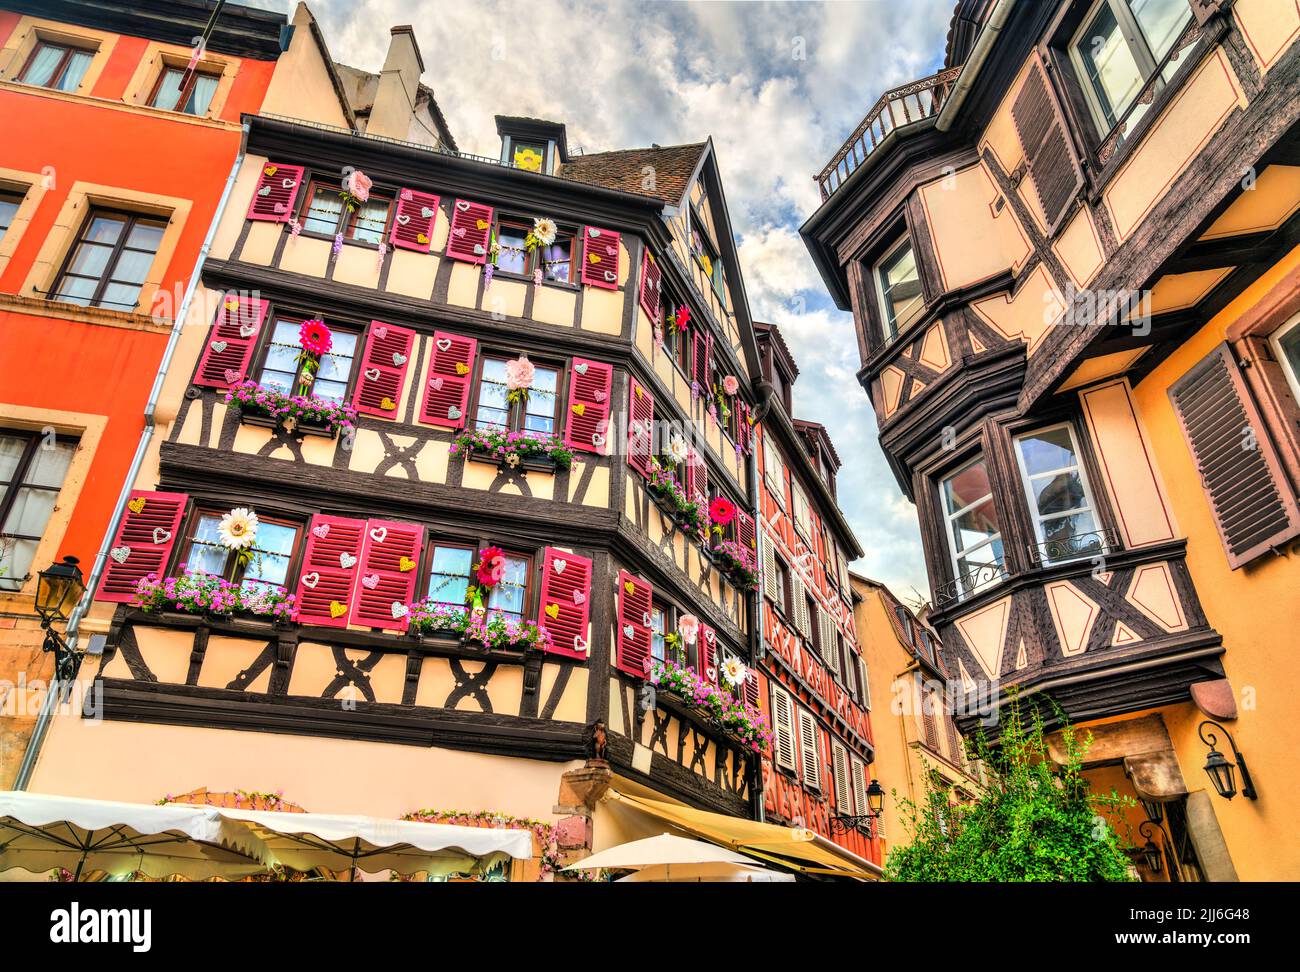 Traditional half-timbered houses in Colmar - Alsace, France Stock Photo